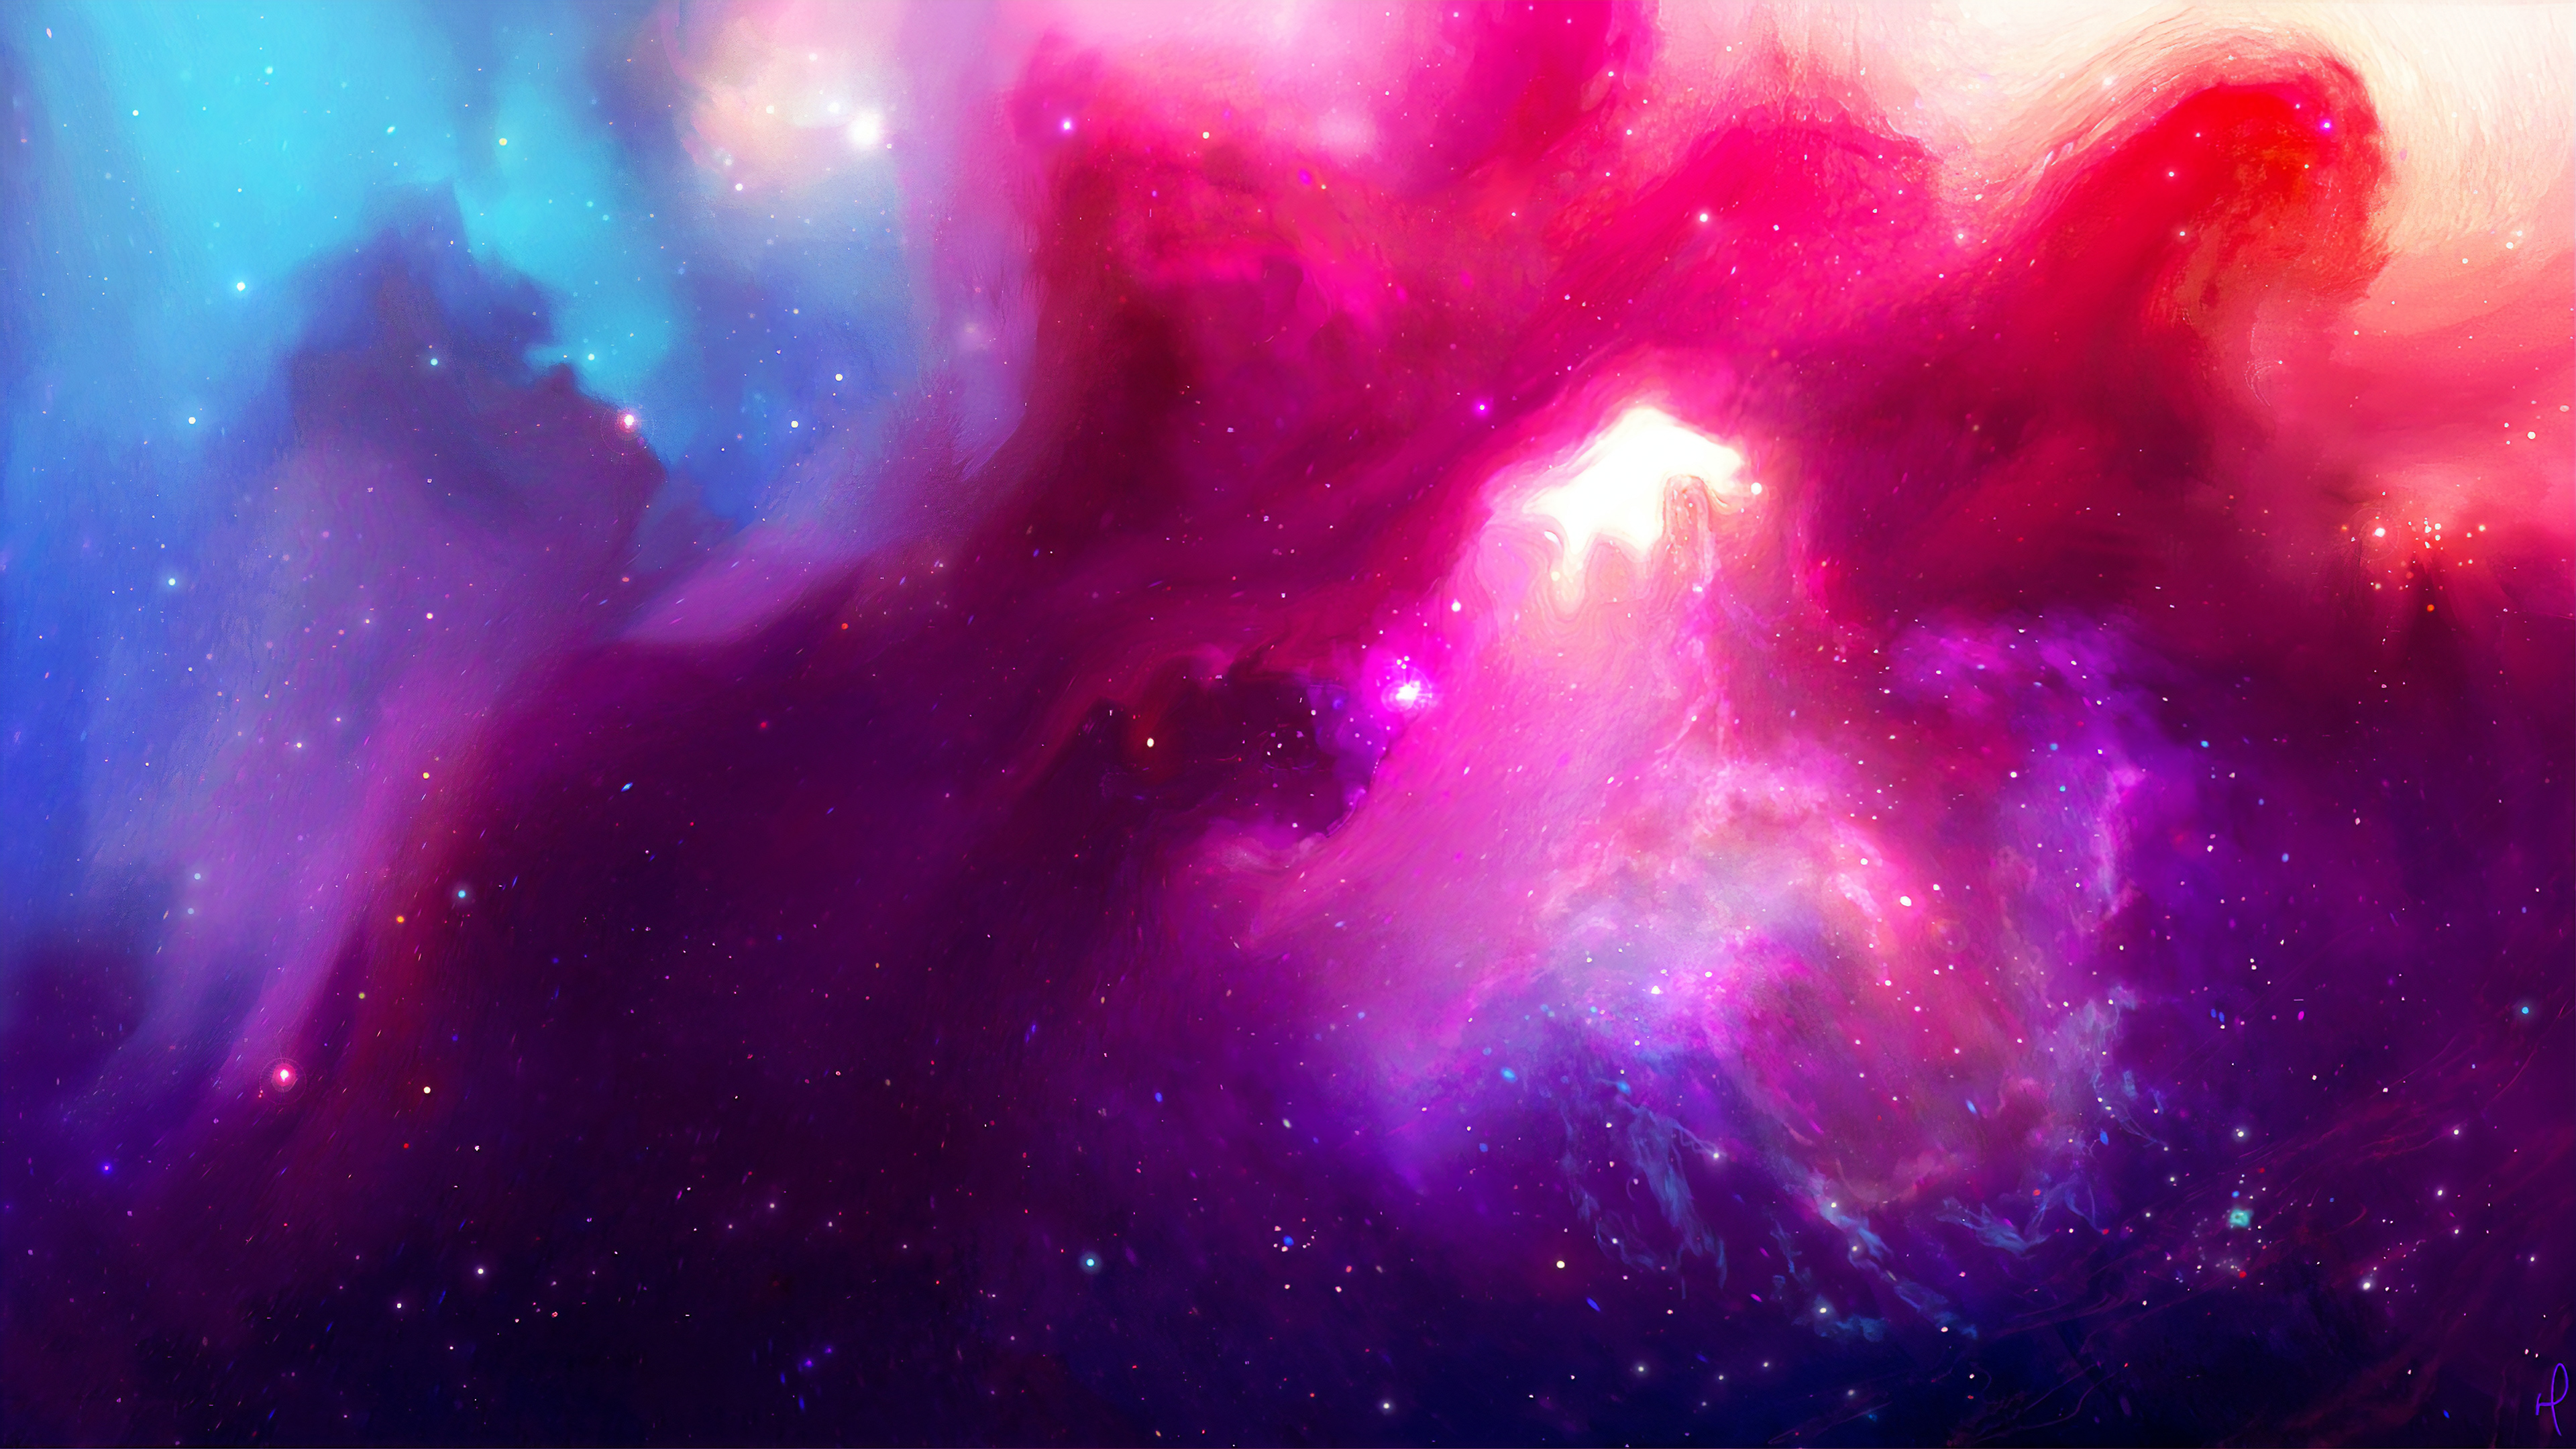 Nebula Cosmos 4k, HD Artist, 4k Wallpapers, Images, Backgrounds